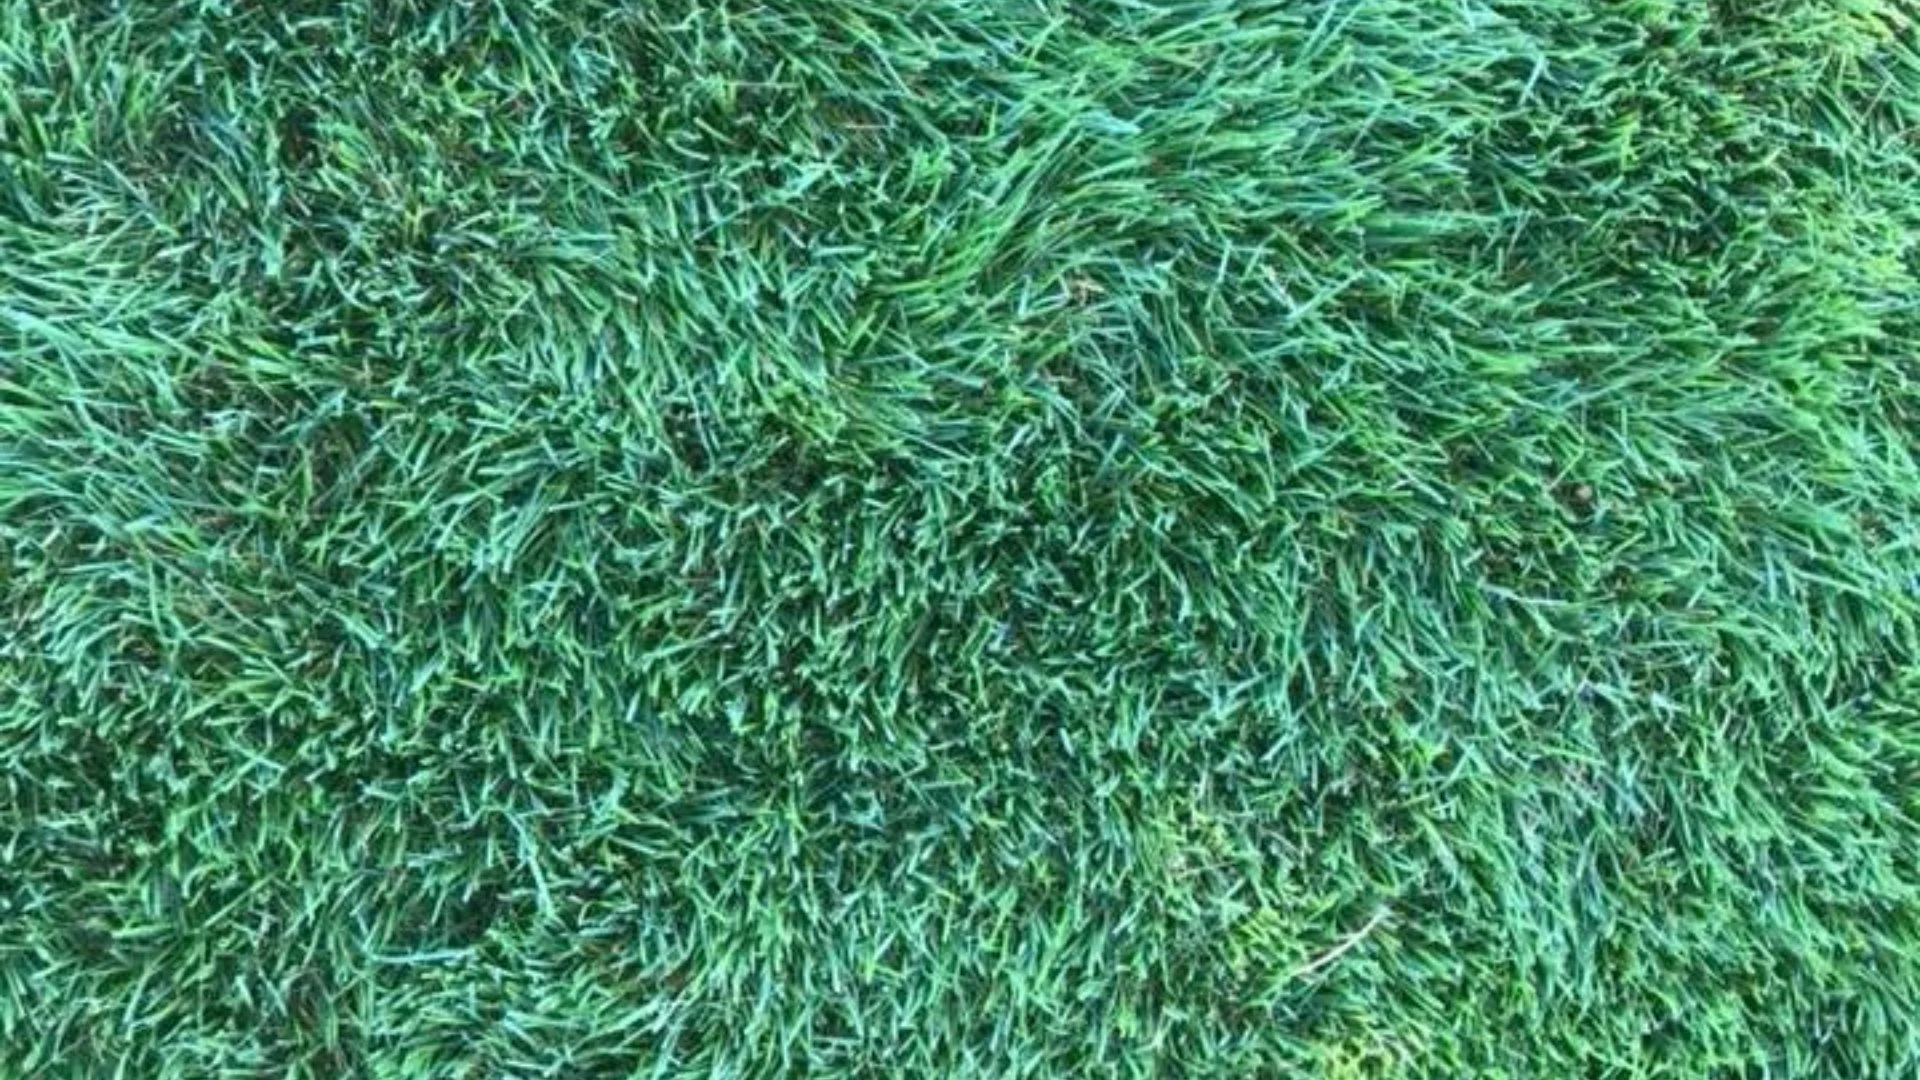 Should I Do Anything After Overseeding to Help the Grass Seeds Grow?